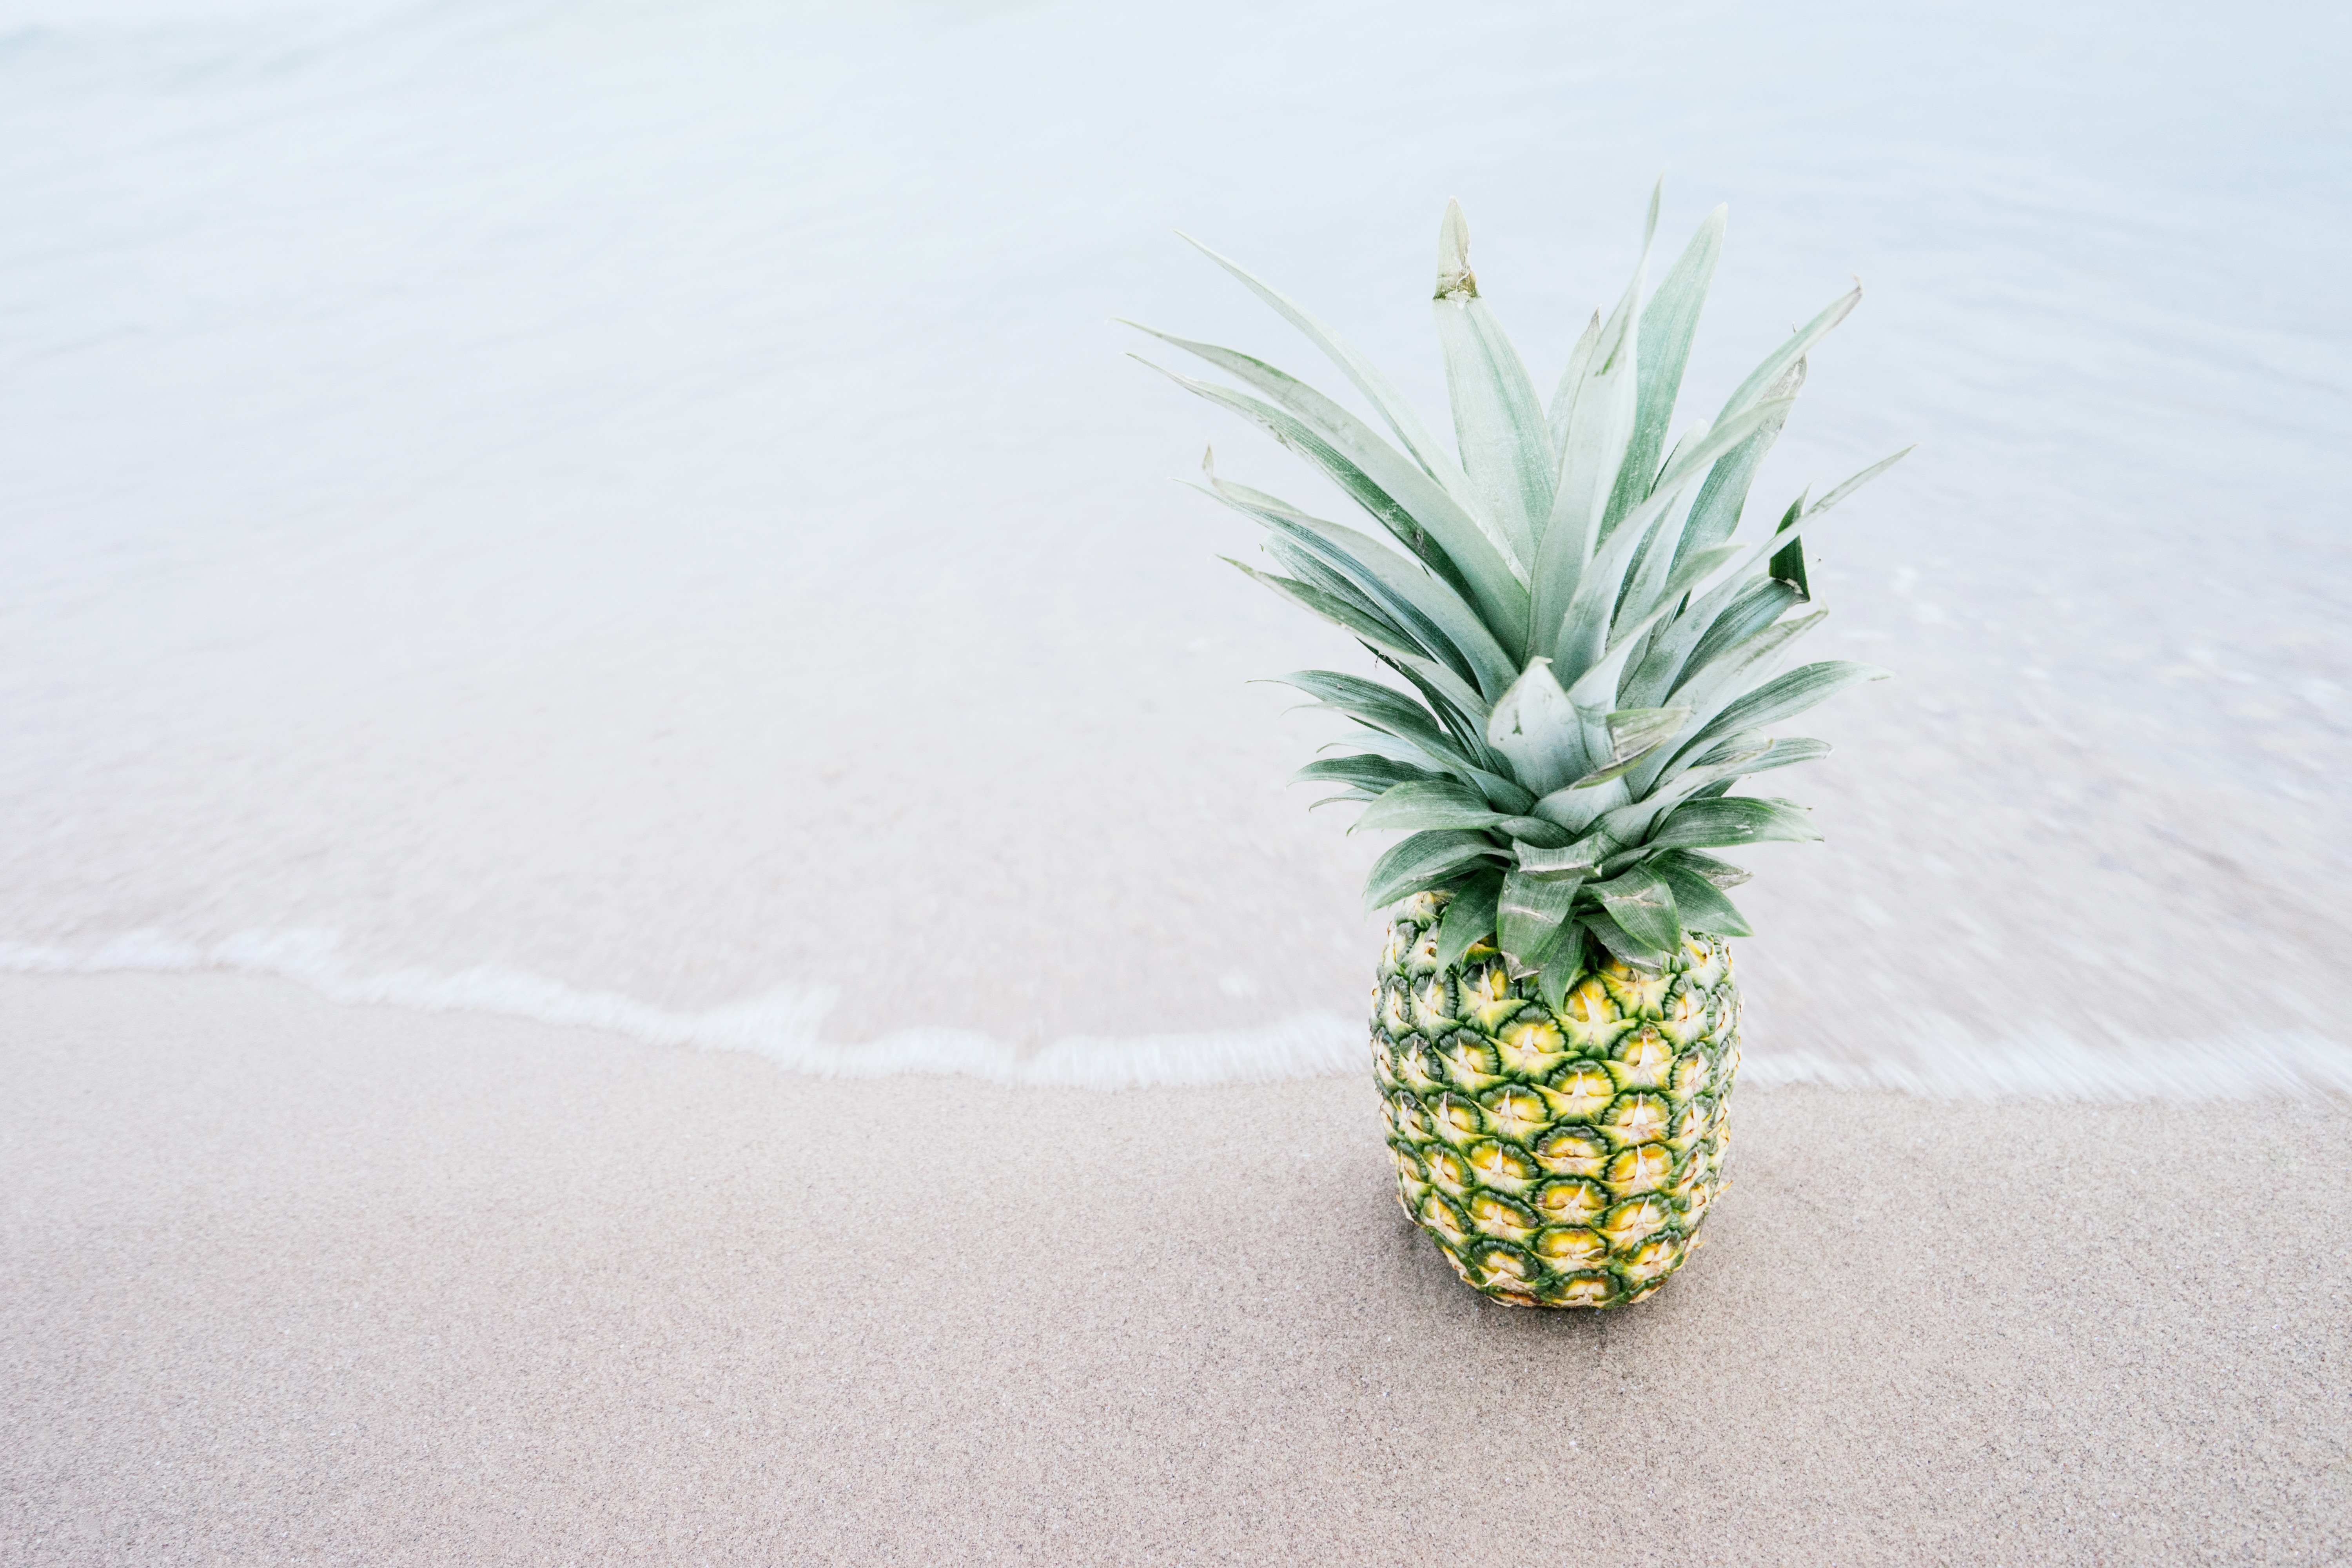 A pineapple on the seashore is washed by the waves